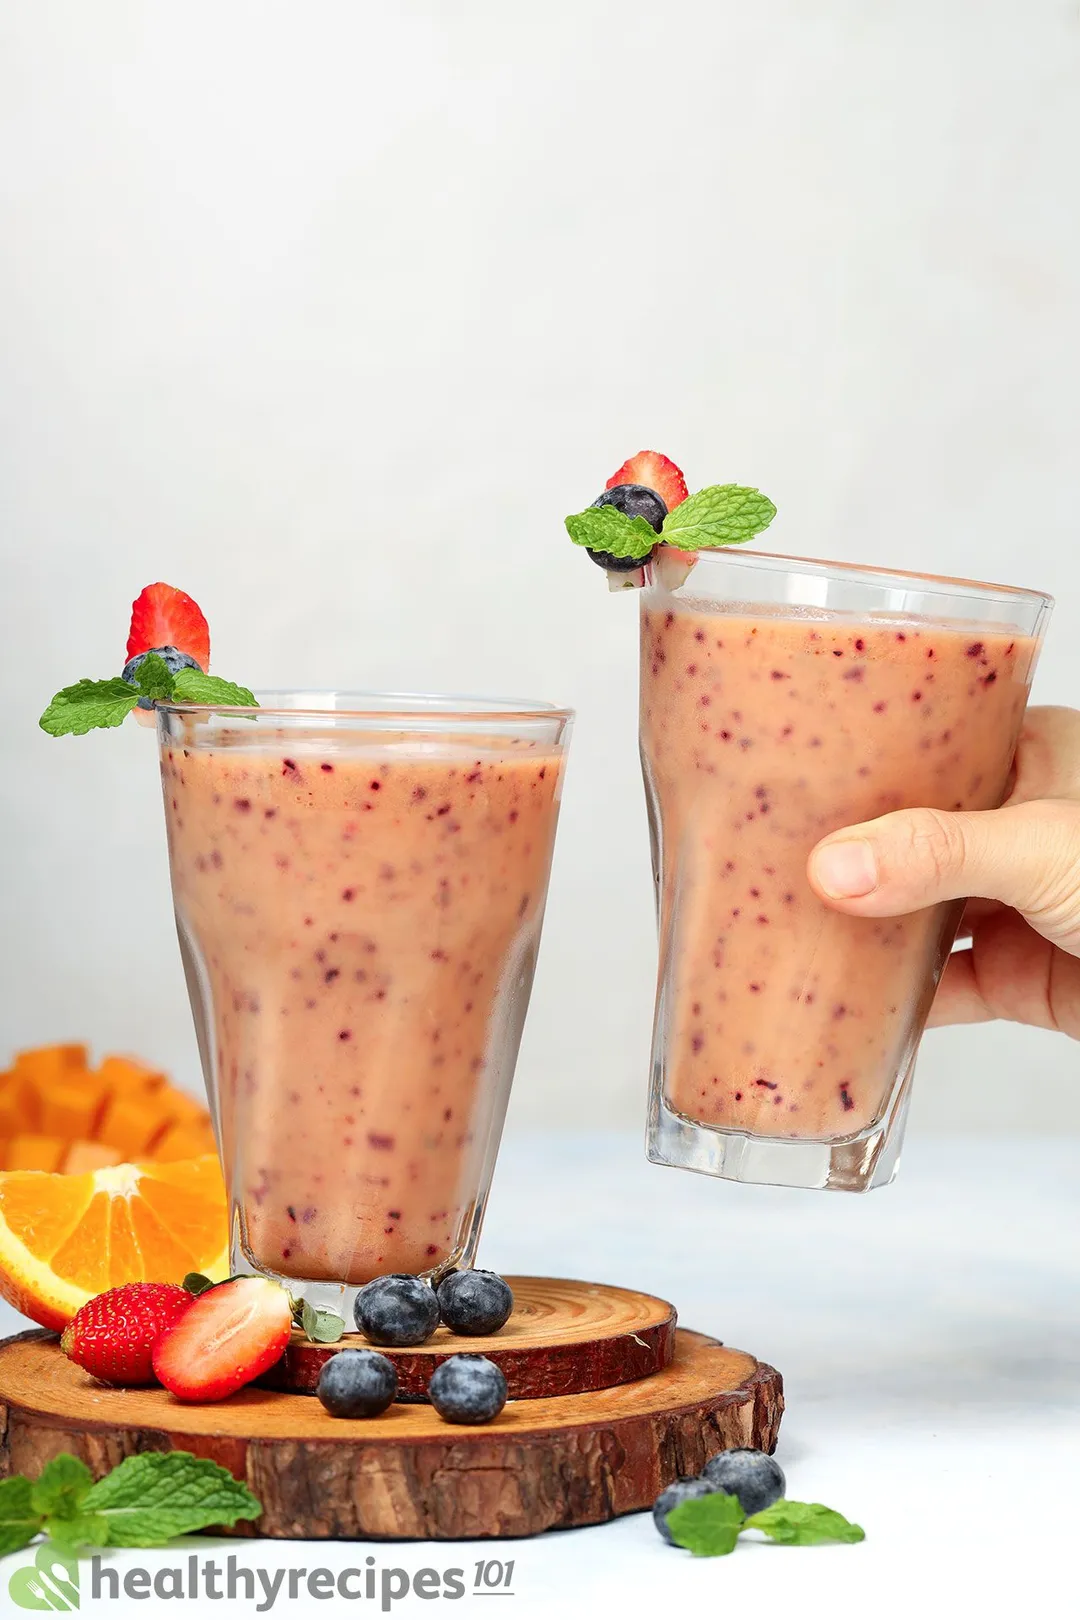 Two glasses of Mango Berry Smoothie placed on a wooden board near strawberries, blueberries, and half an orange. A hand is picking one of them up.